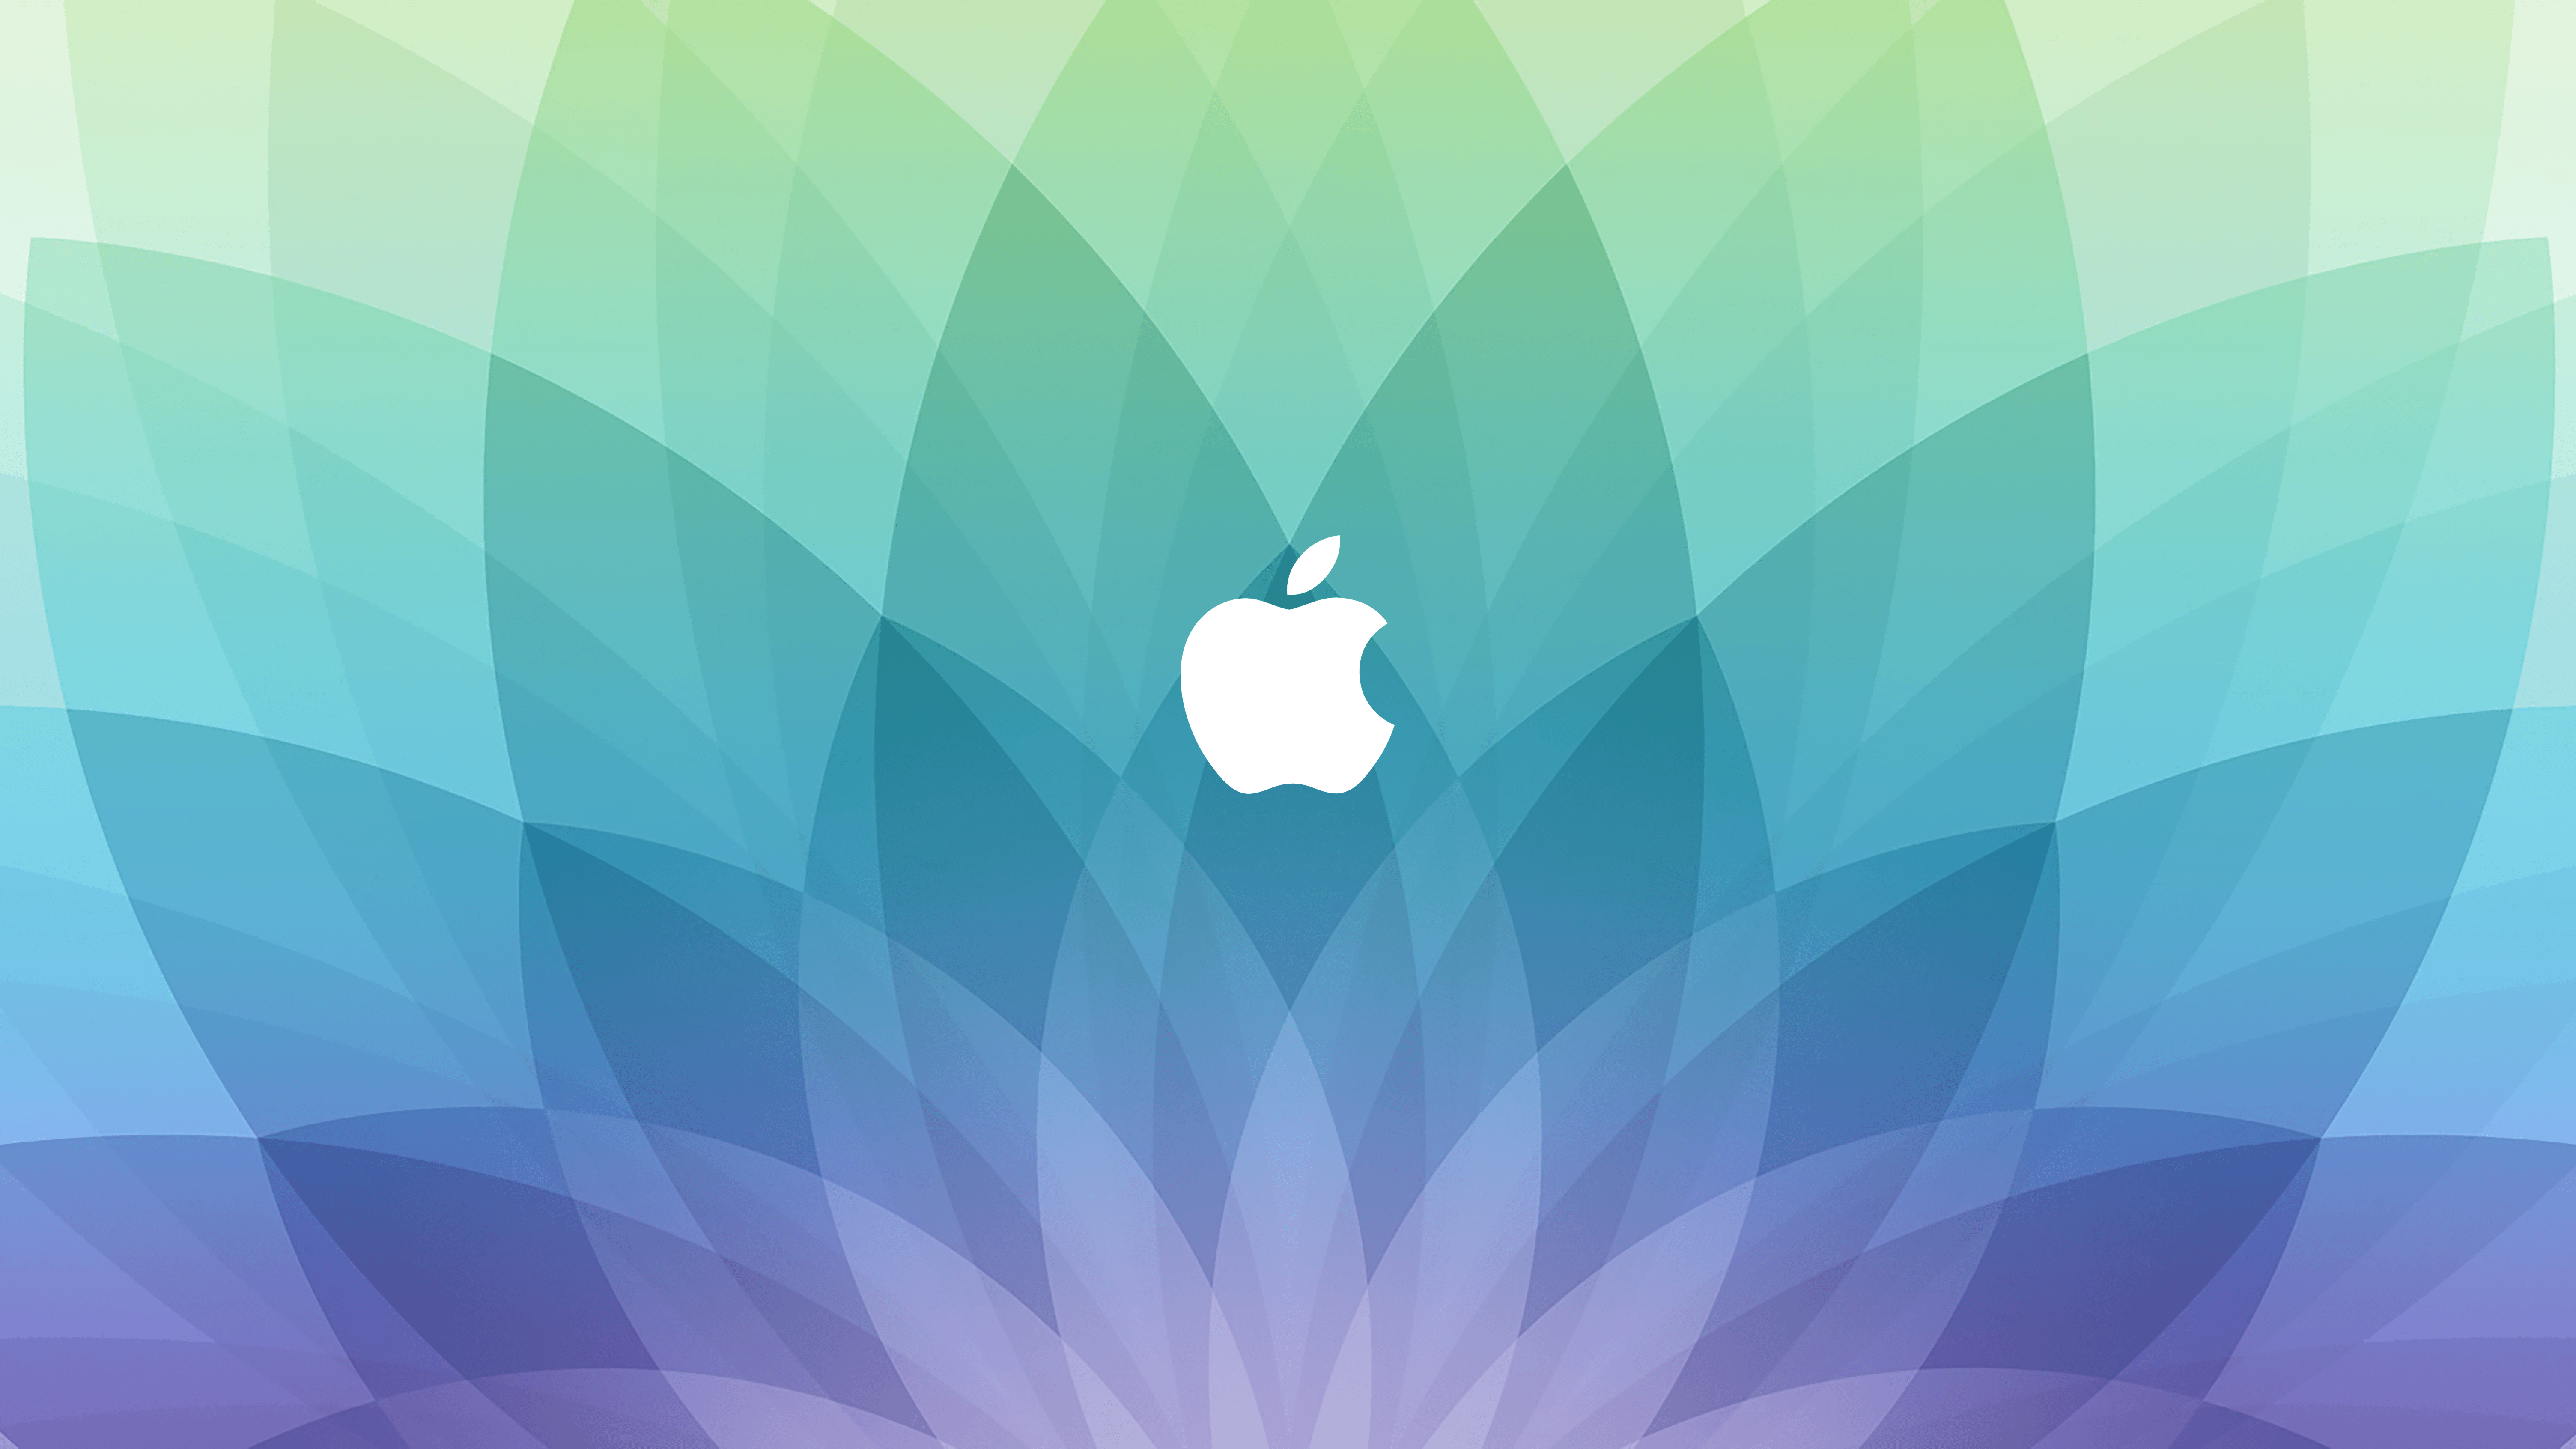 Download Apple's March 9 'Spring Forward' event wallpaper